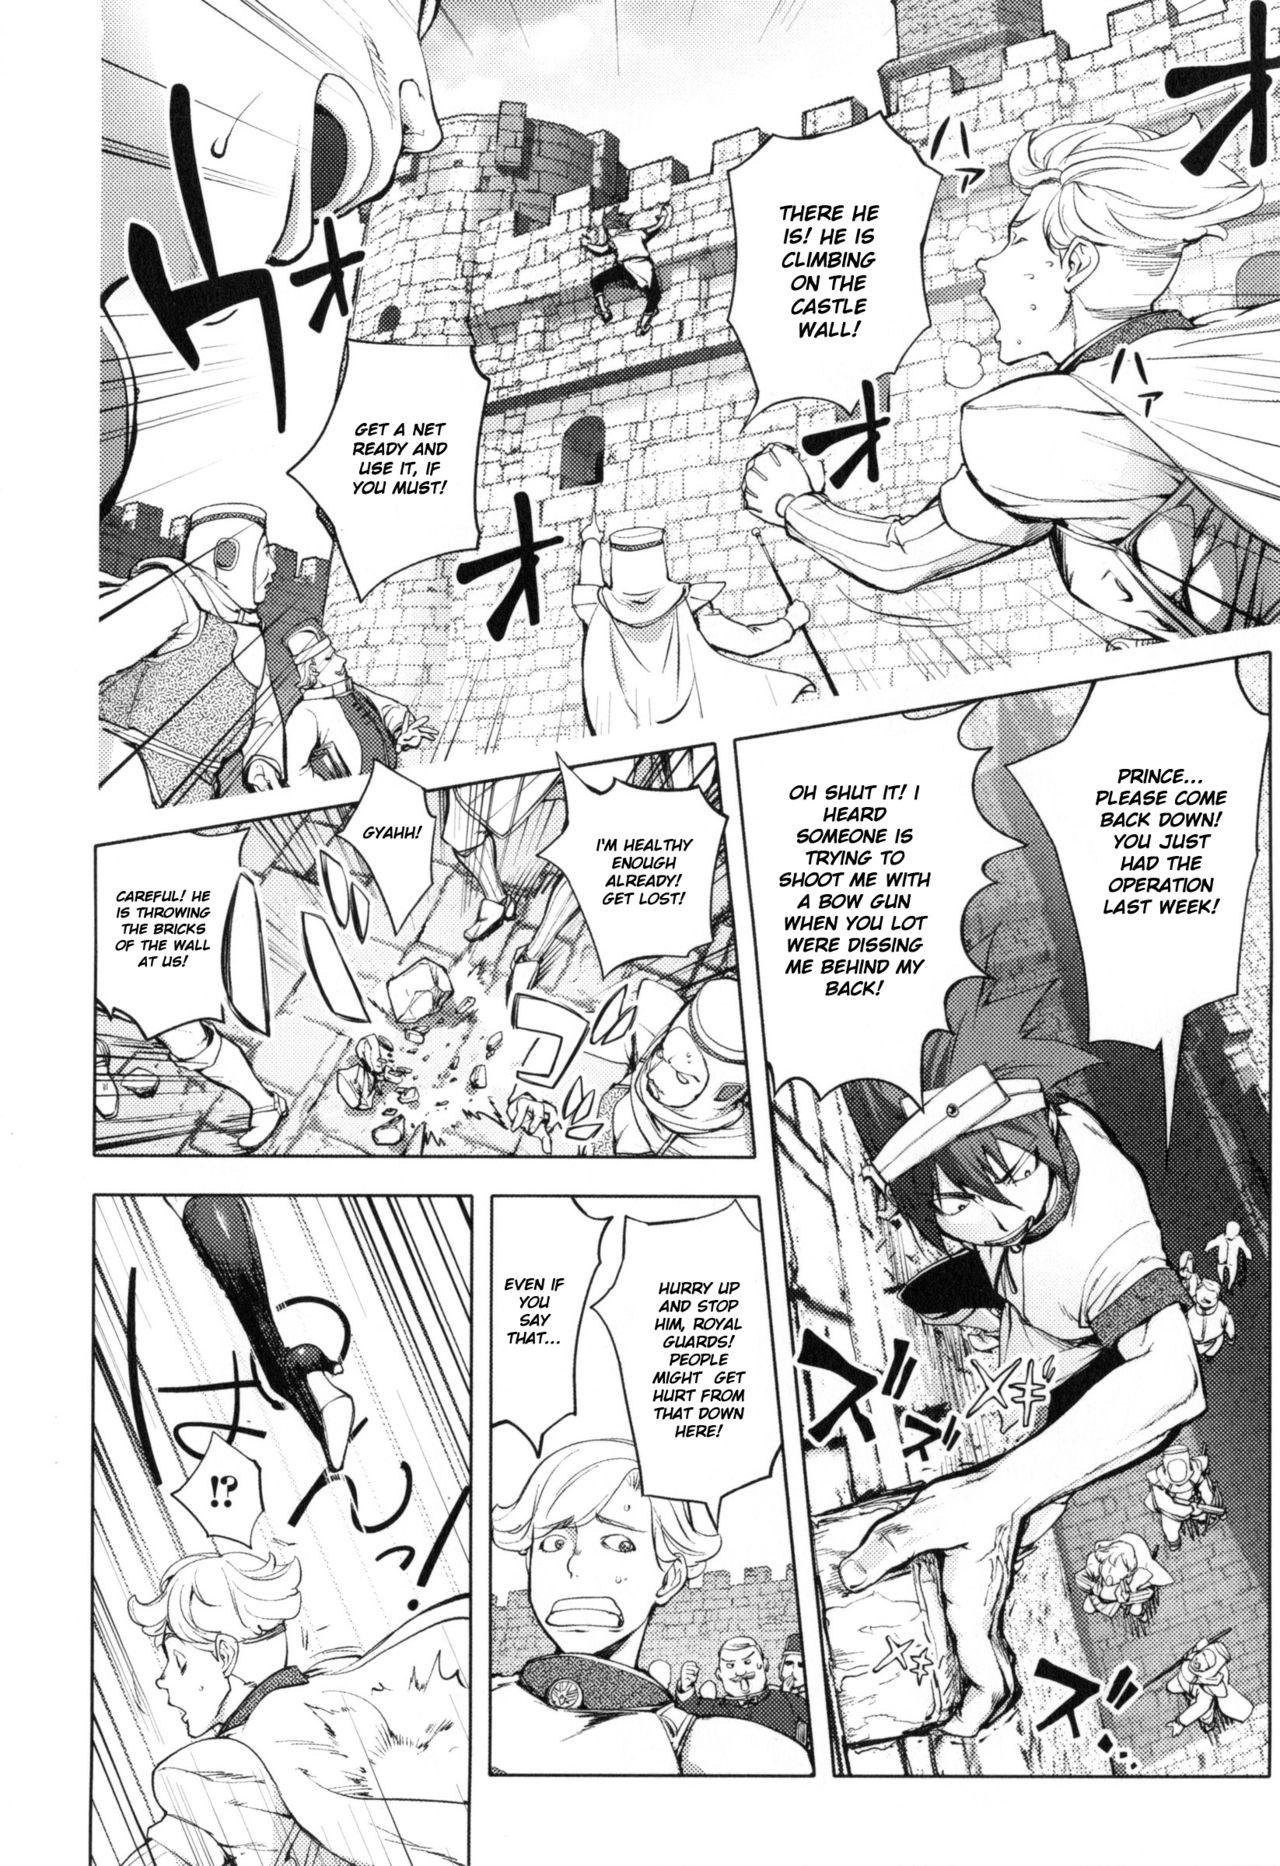 Casero Snake Girls 2 | The Adventures Of The Three Heroes: Chapter 6 - Snake Girl Part 2 Humiliation - Page 1